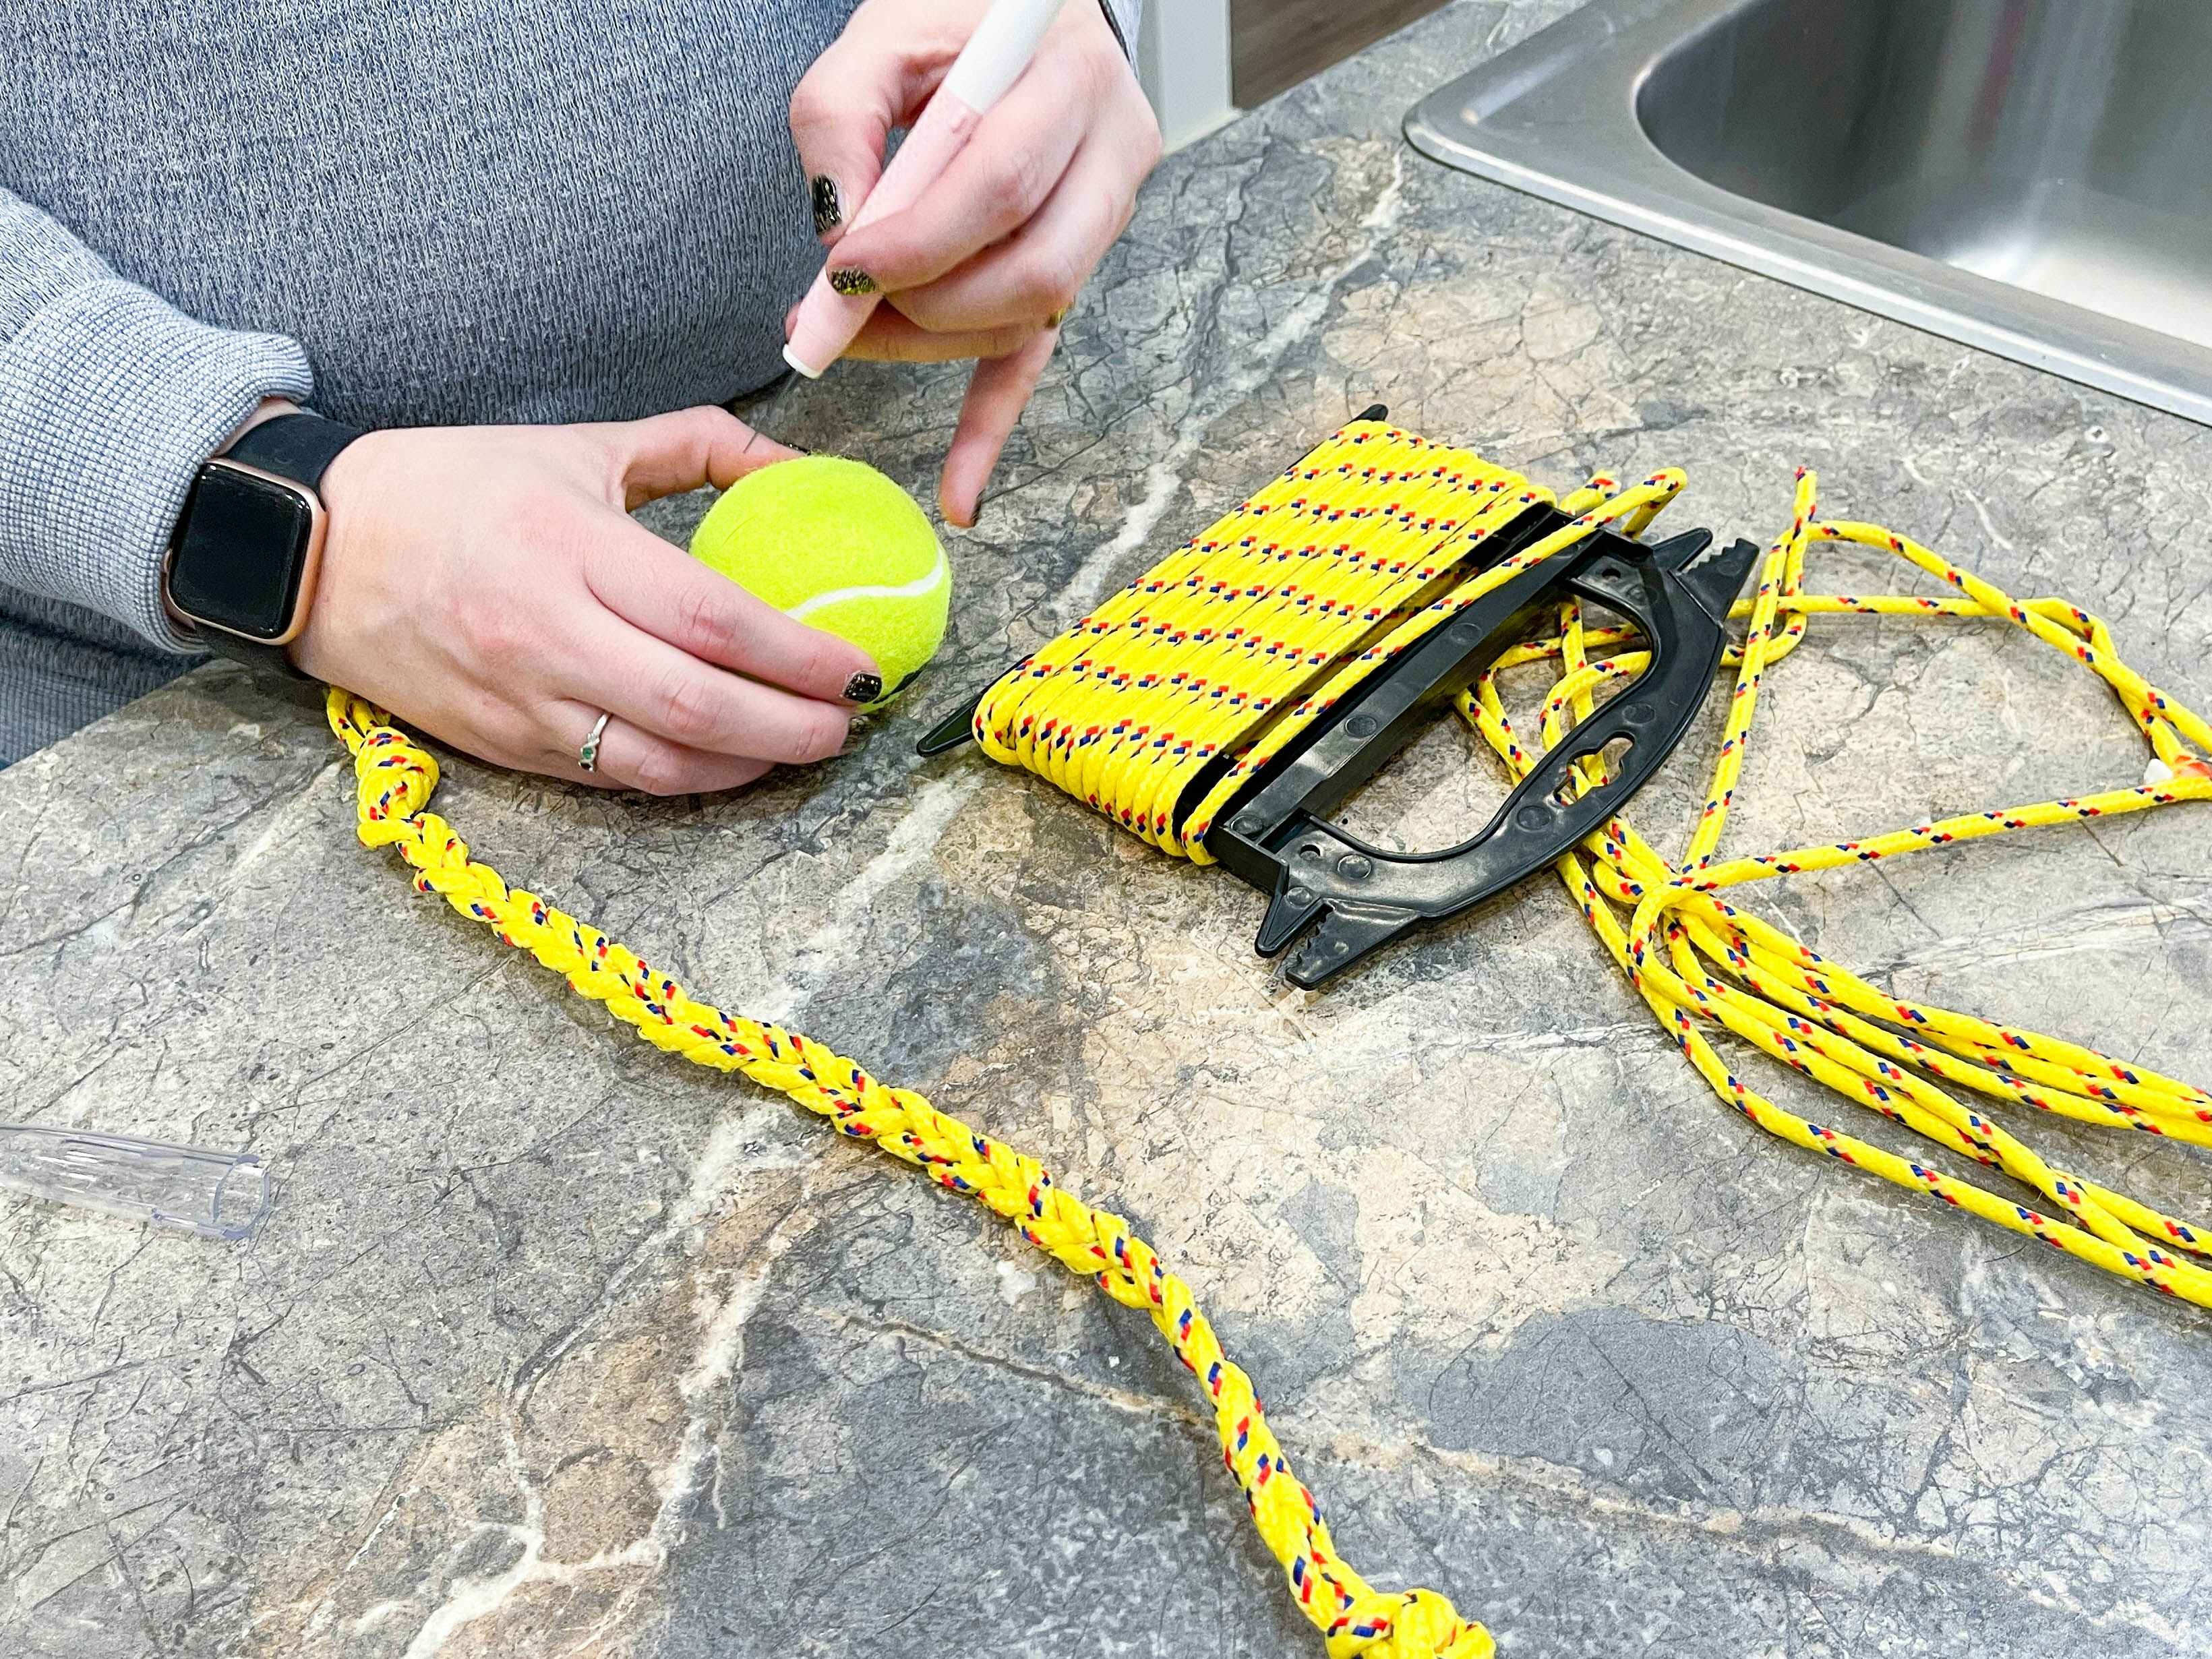 https://prod-cdn-thekrazycouponlady.imgix.net/wp-content/uploads/2023/03/diy-easy-dog-toys-rope-tennis-ball-1-1678130558-1678130558.jpg?auto=format&fit=fill&q=25